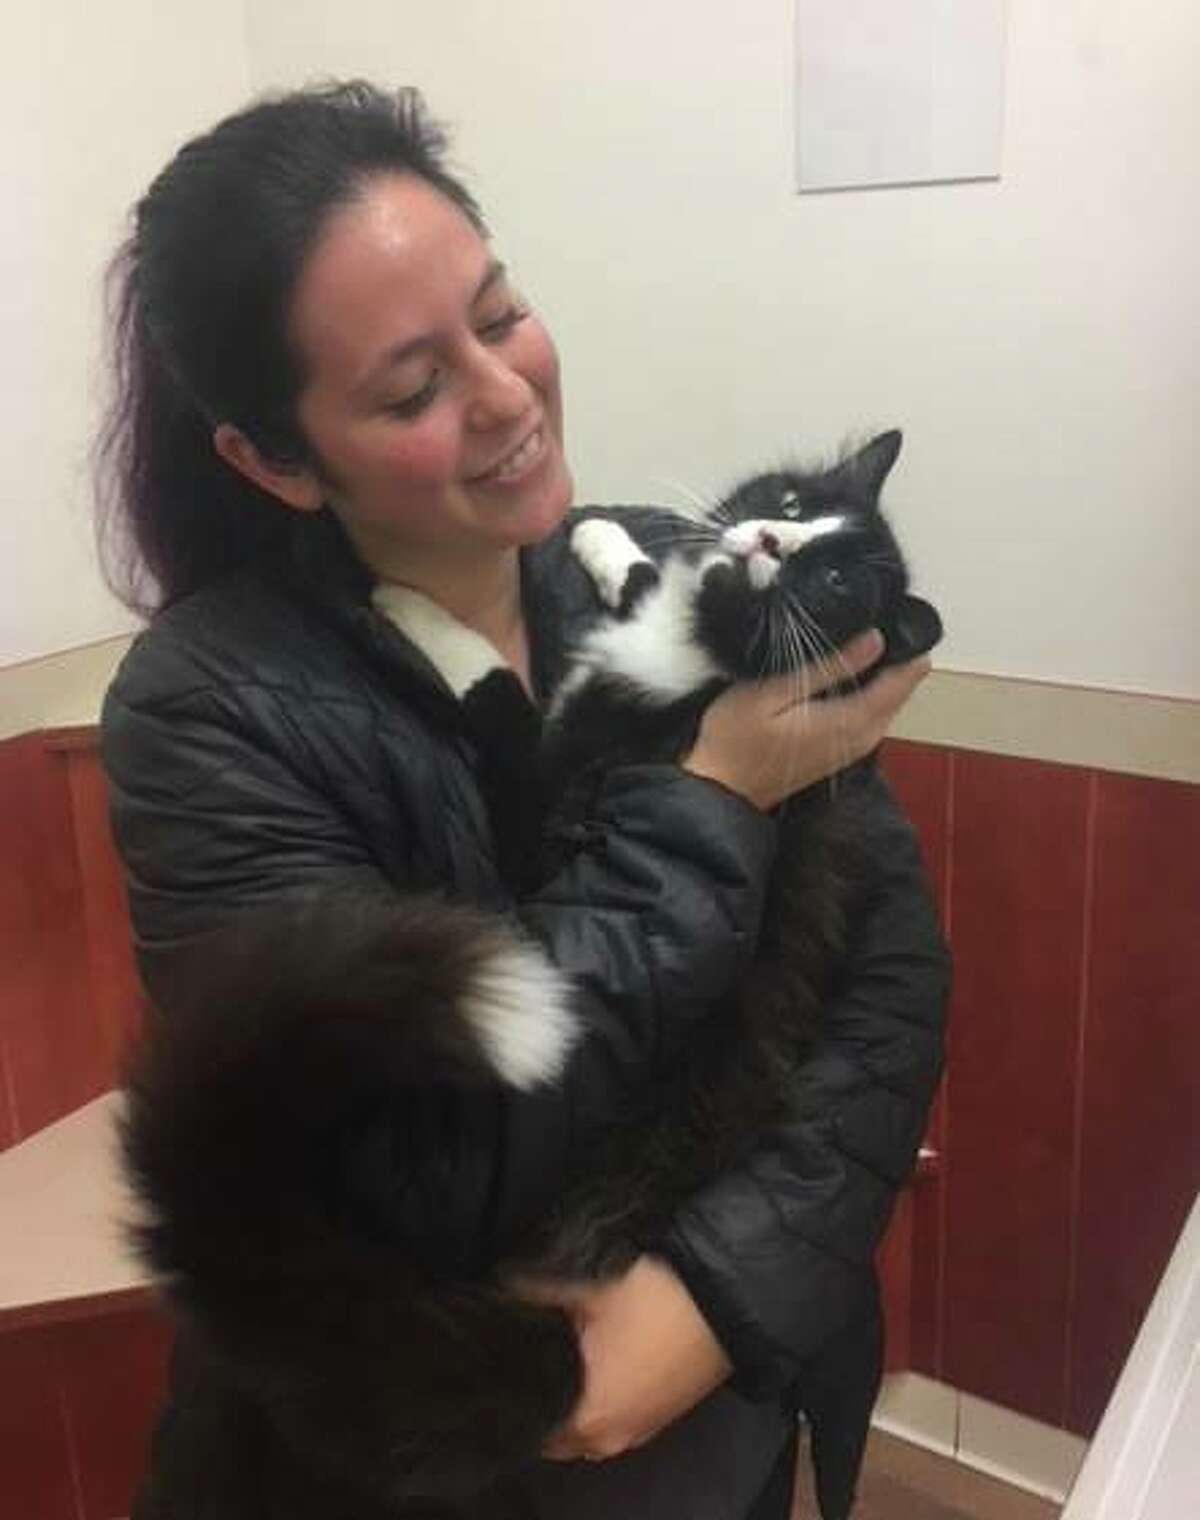 Squishy was reunited with his owner last week after being found 80 miles away from his home. GALLERY: Keep clicking to see companies that let you take pets to work, and maybe keep them closer to you than Squishy was.